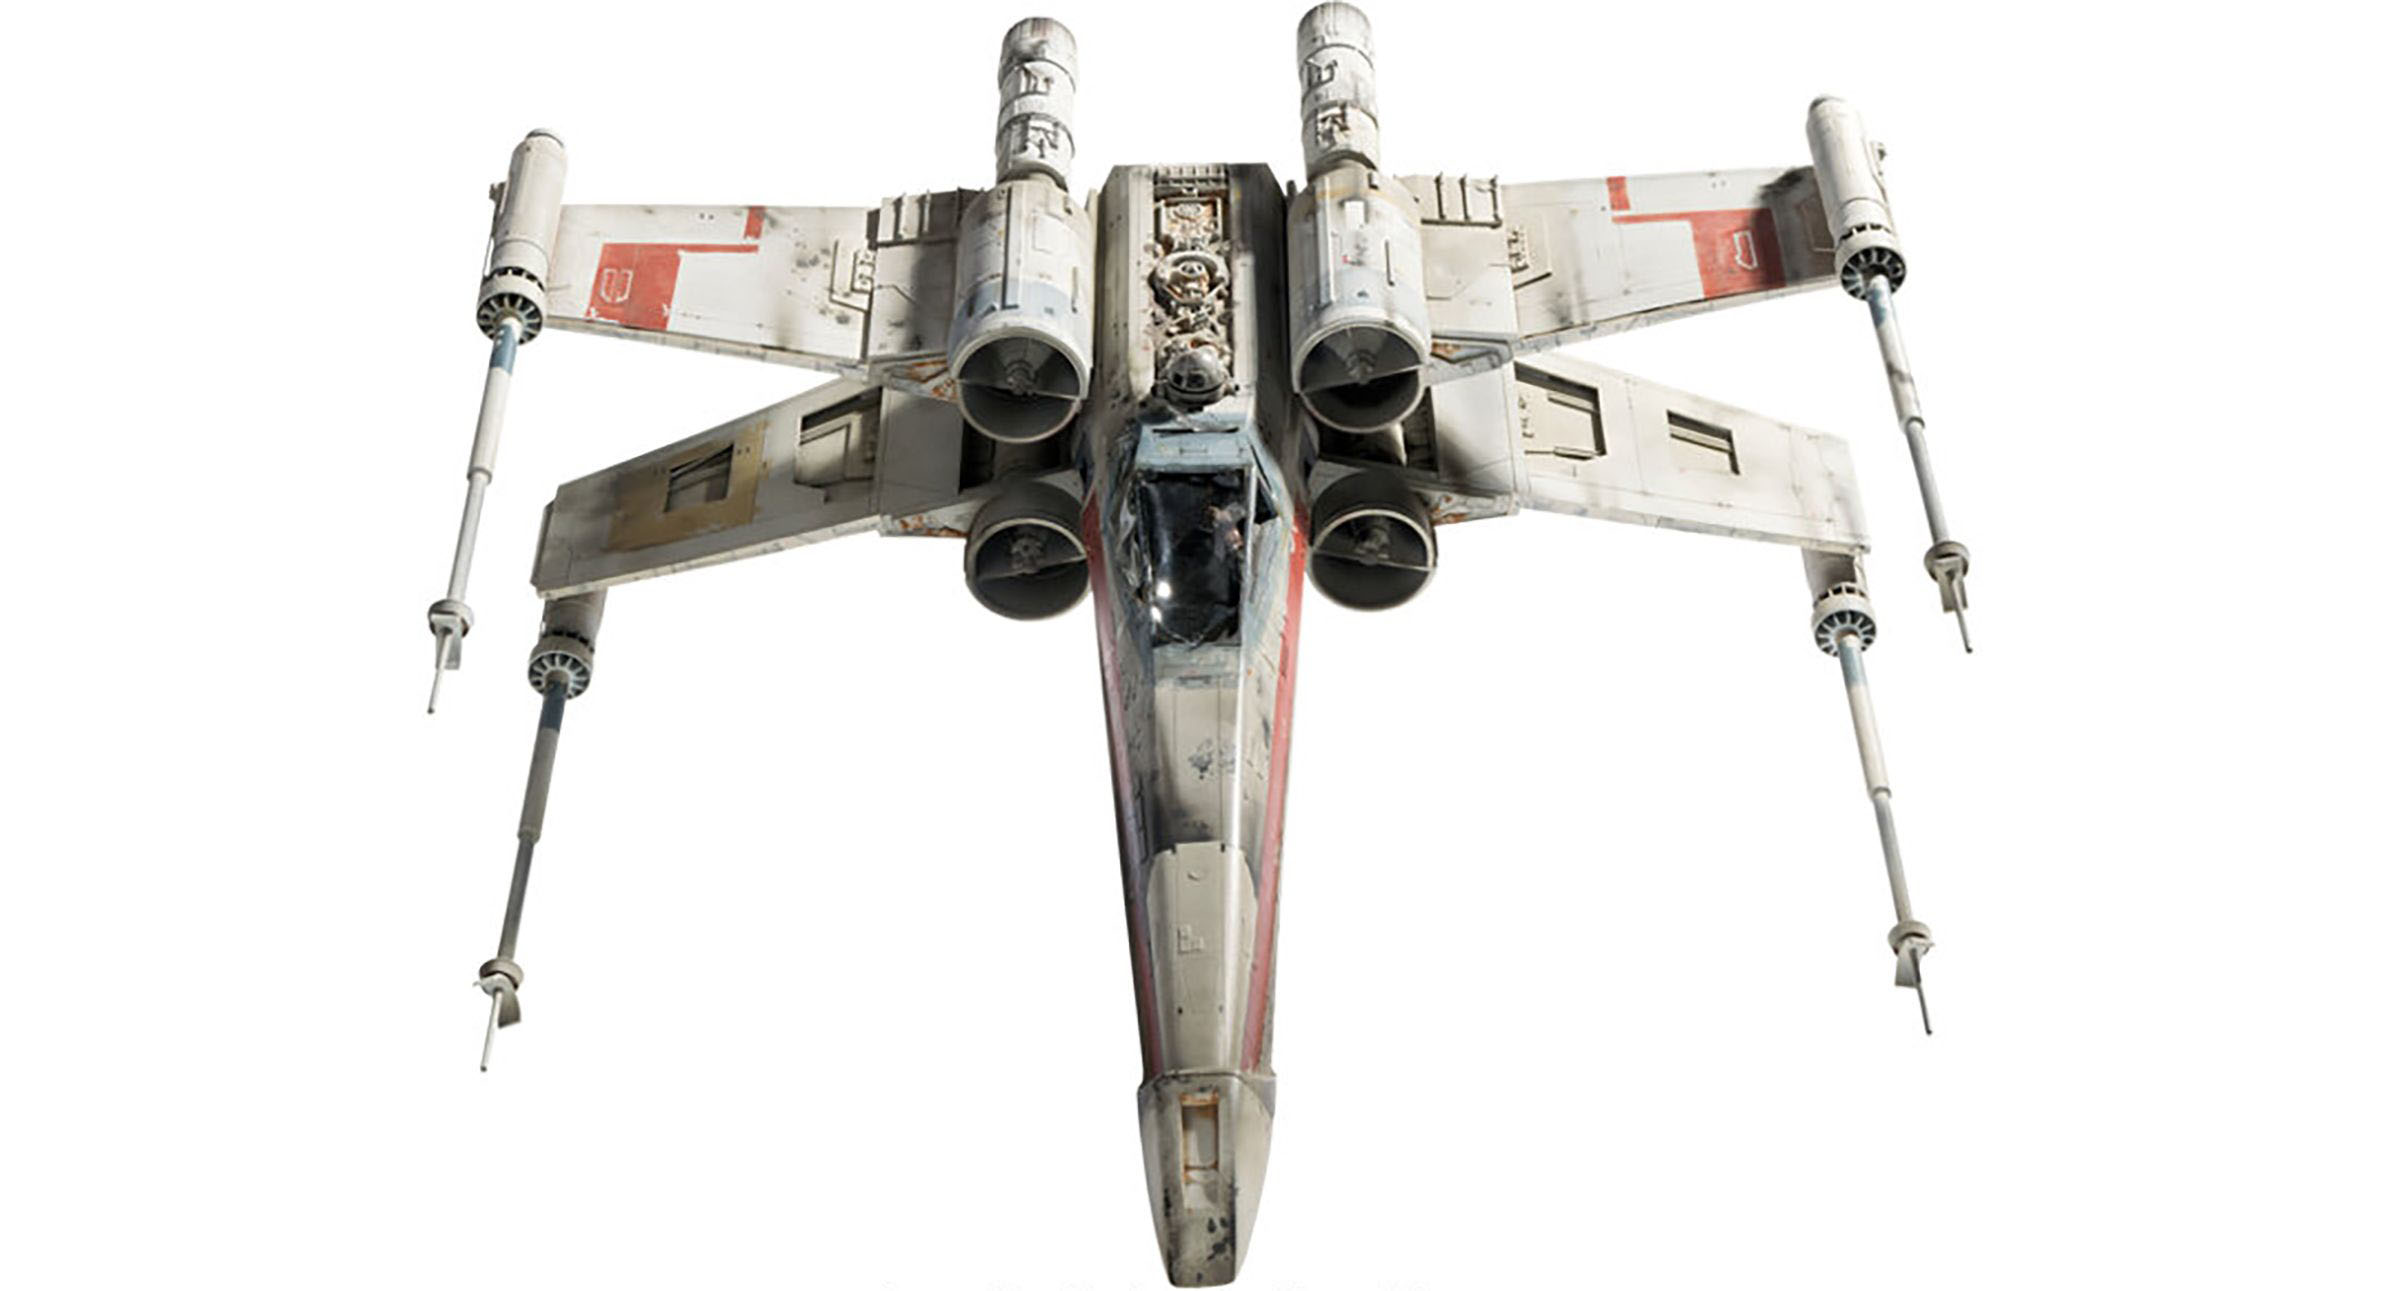 A long-lost model of an X-wing fighter used in the original 1977 “Star Wars” movie is up for au...